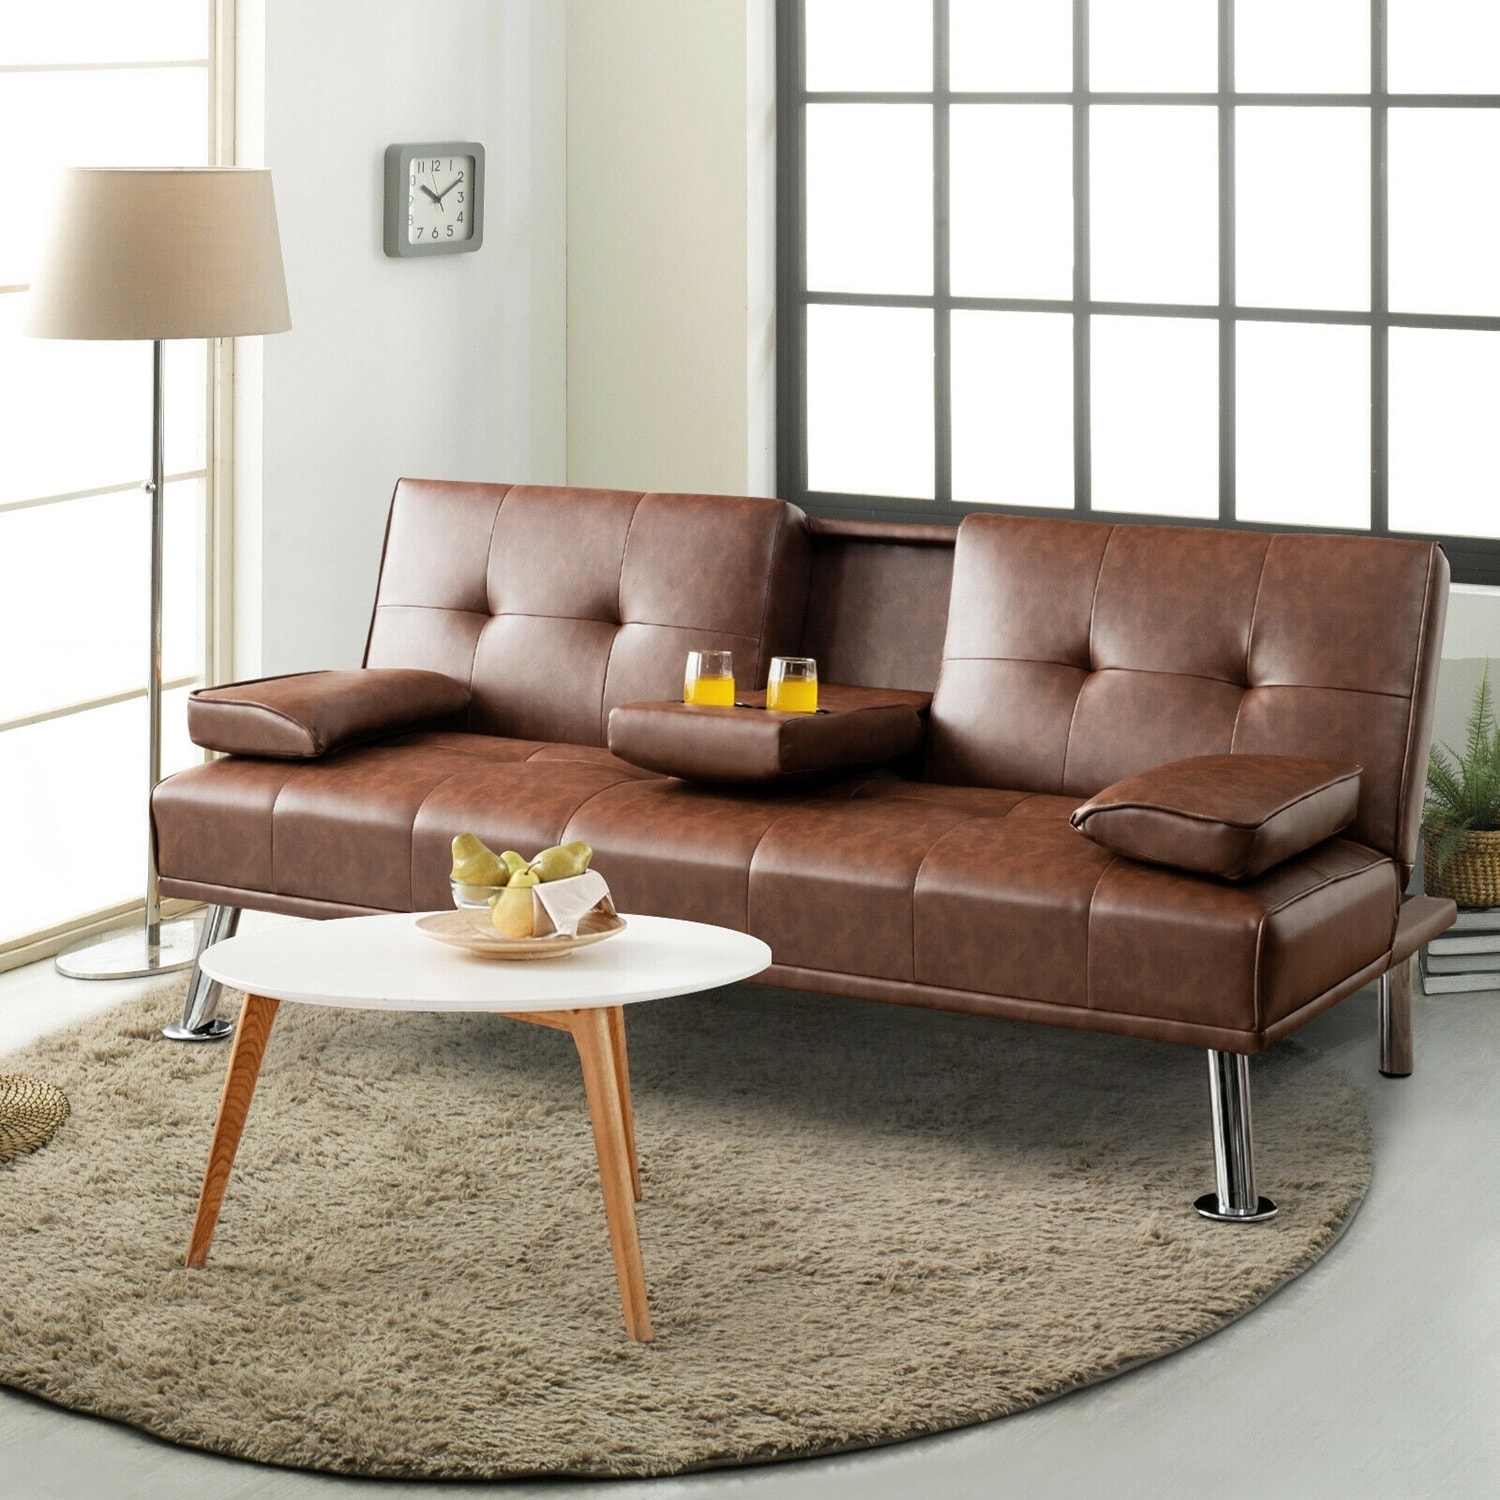 the convertible brown leather futon